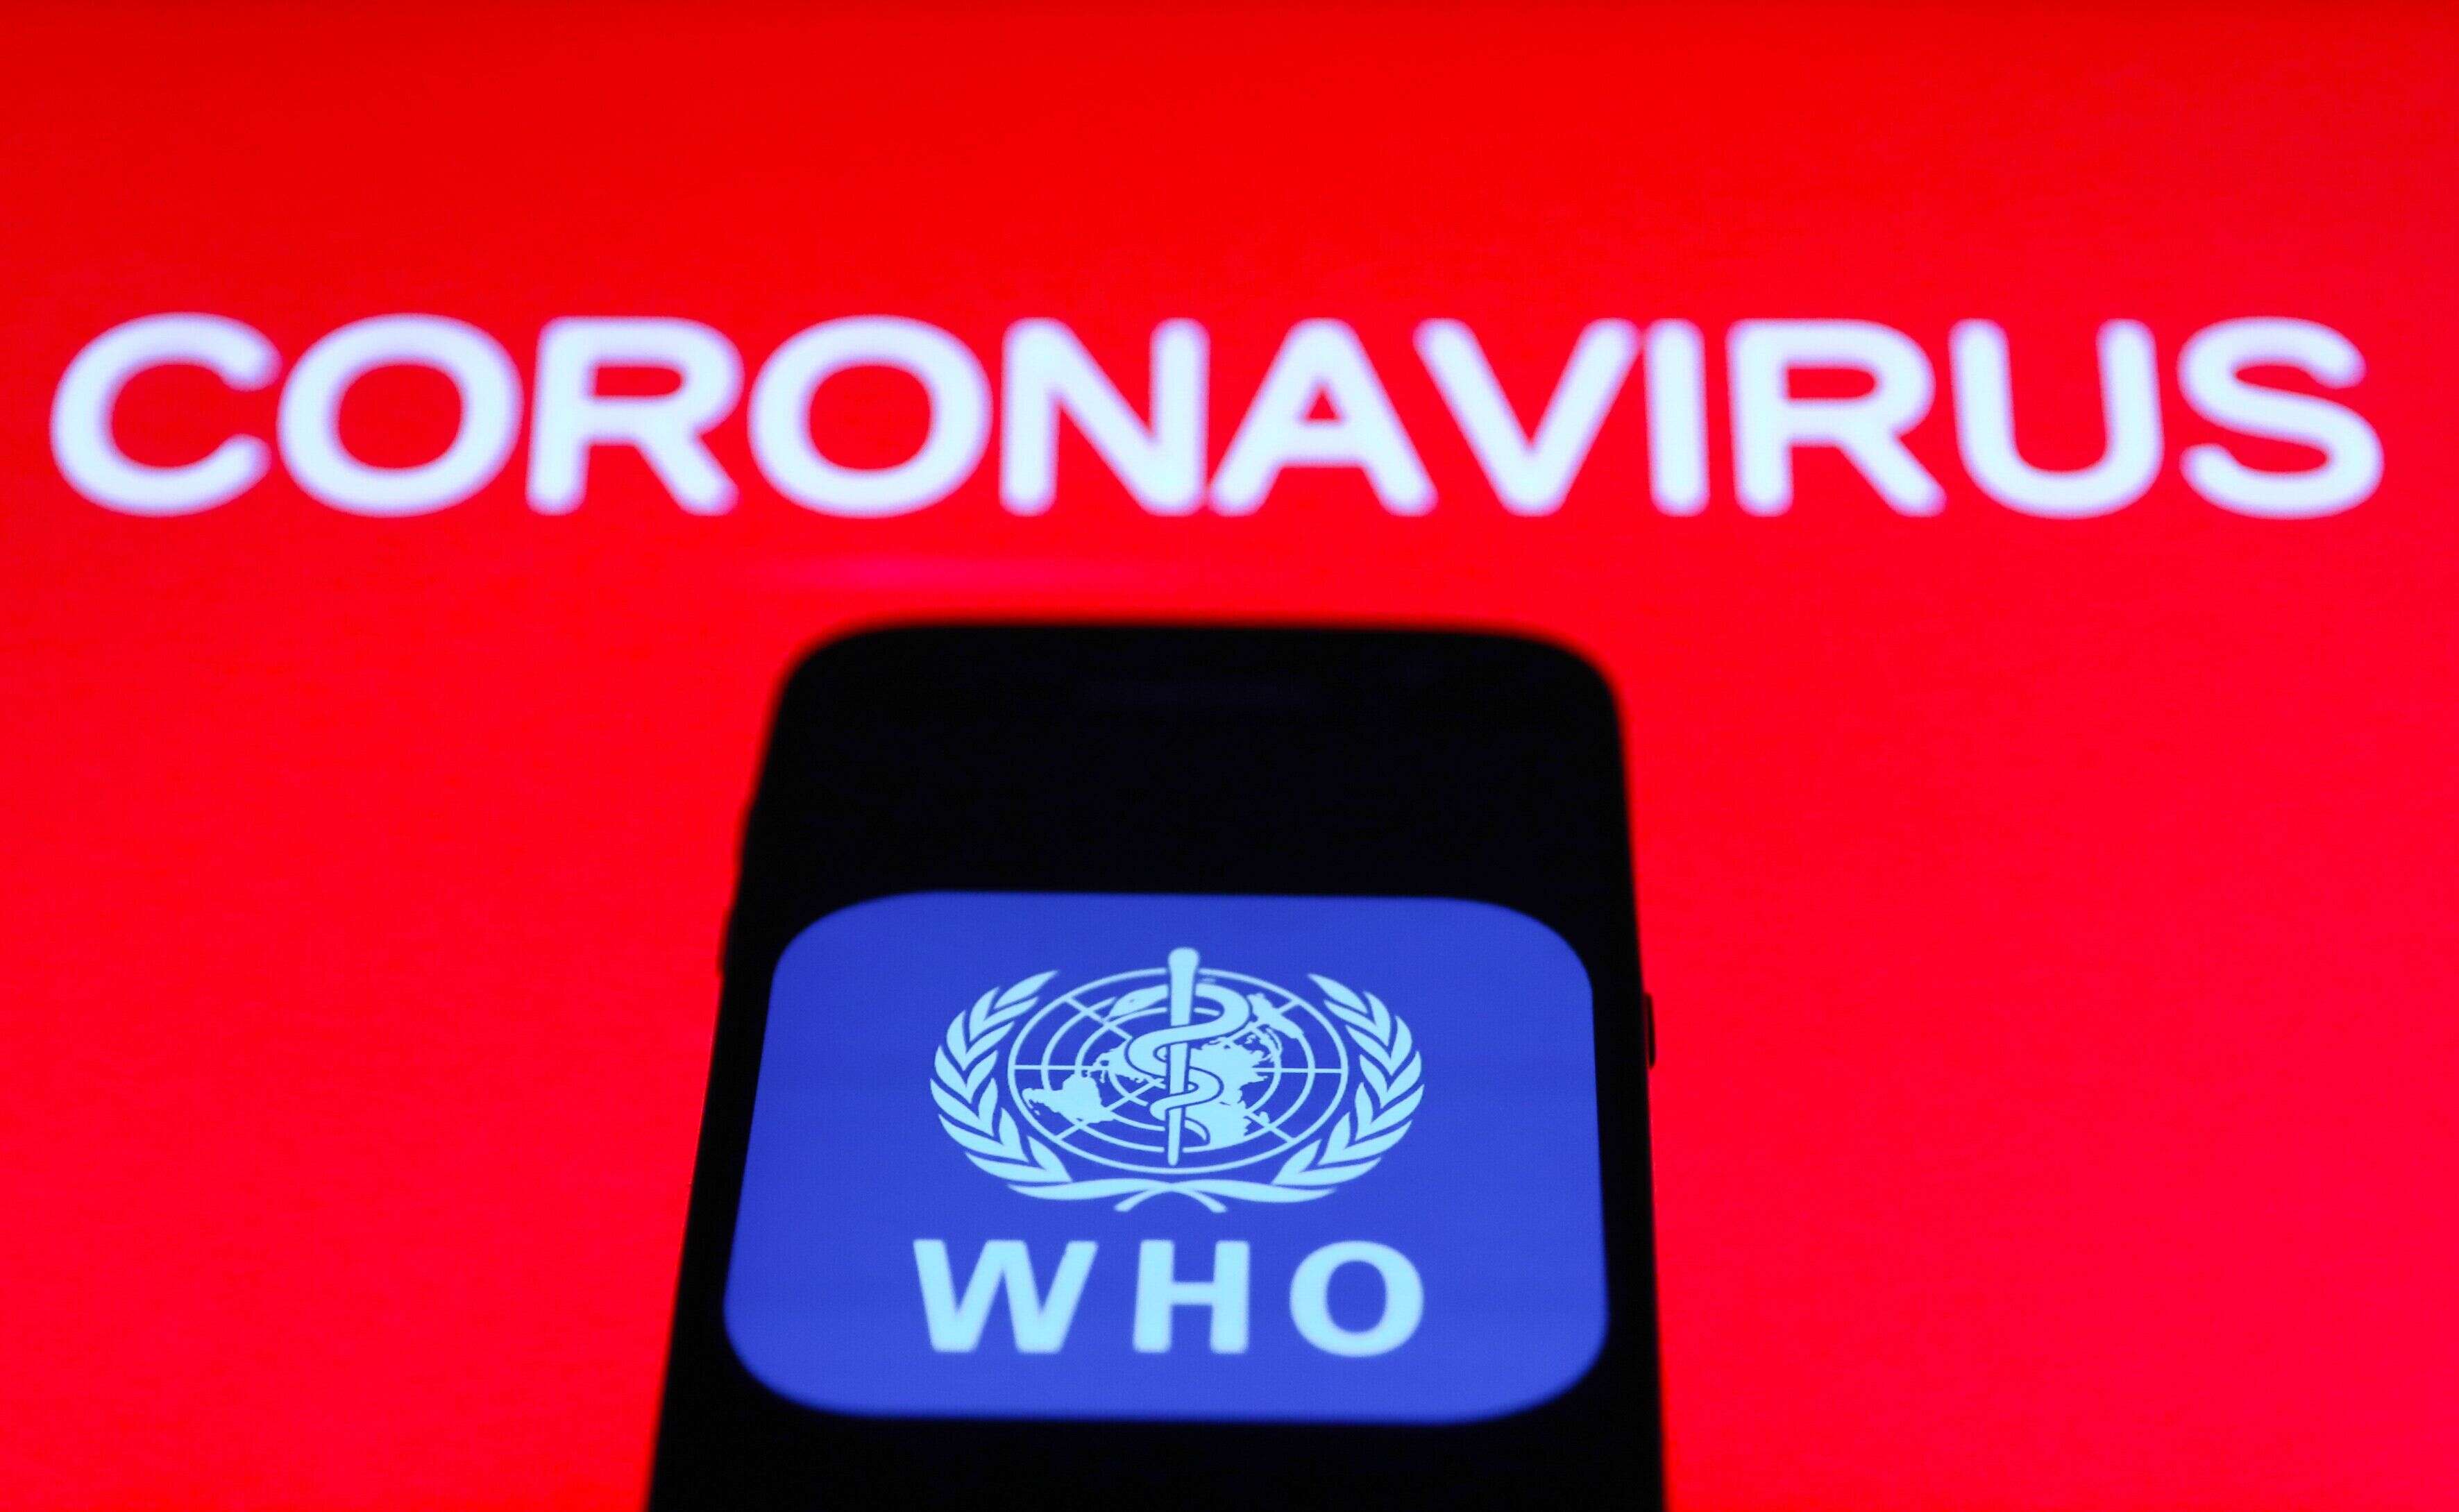 World Health Organization (WHO) app icon is seen on the smartphone screen with coronavirus sign in the background in this illustration photo taken in Poland on March 21, 2020. (Photo by Jakub Porzycki/NurPhoto via Getty Images)